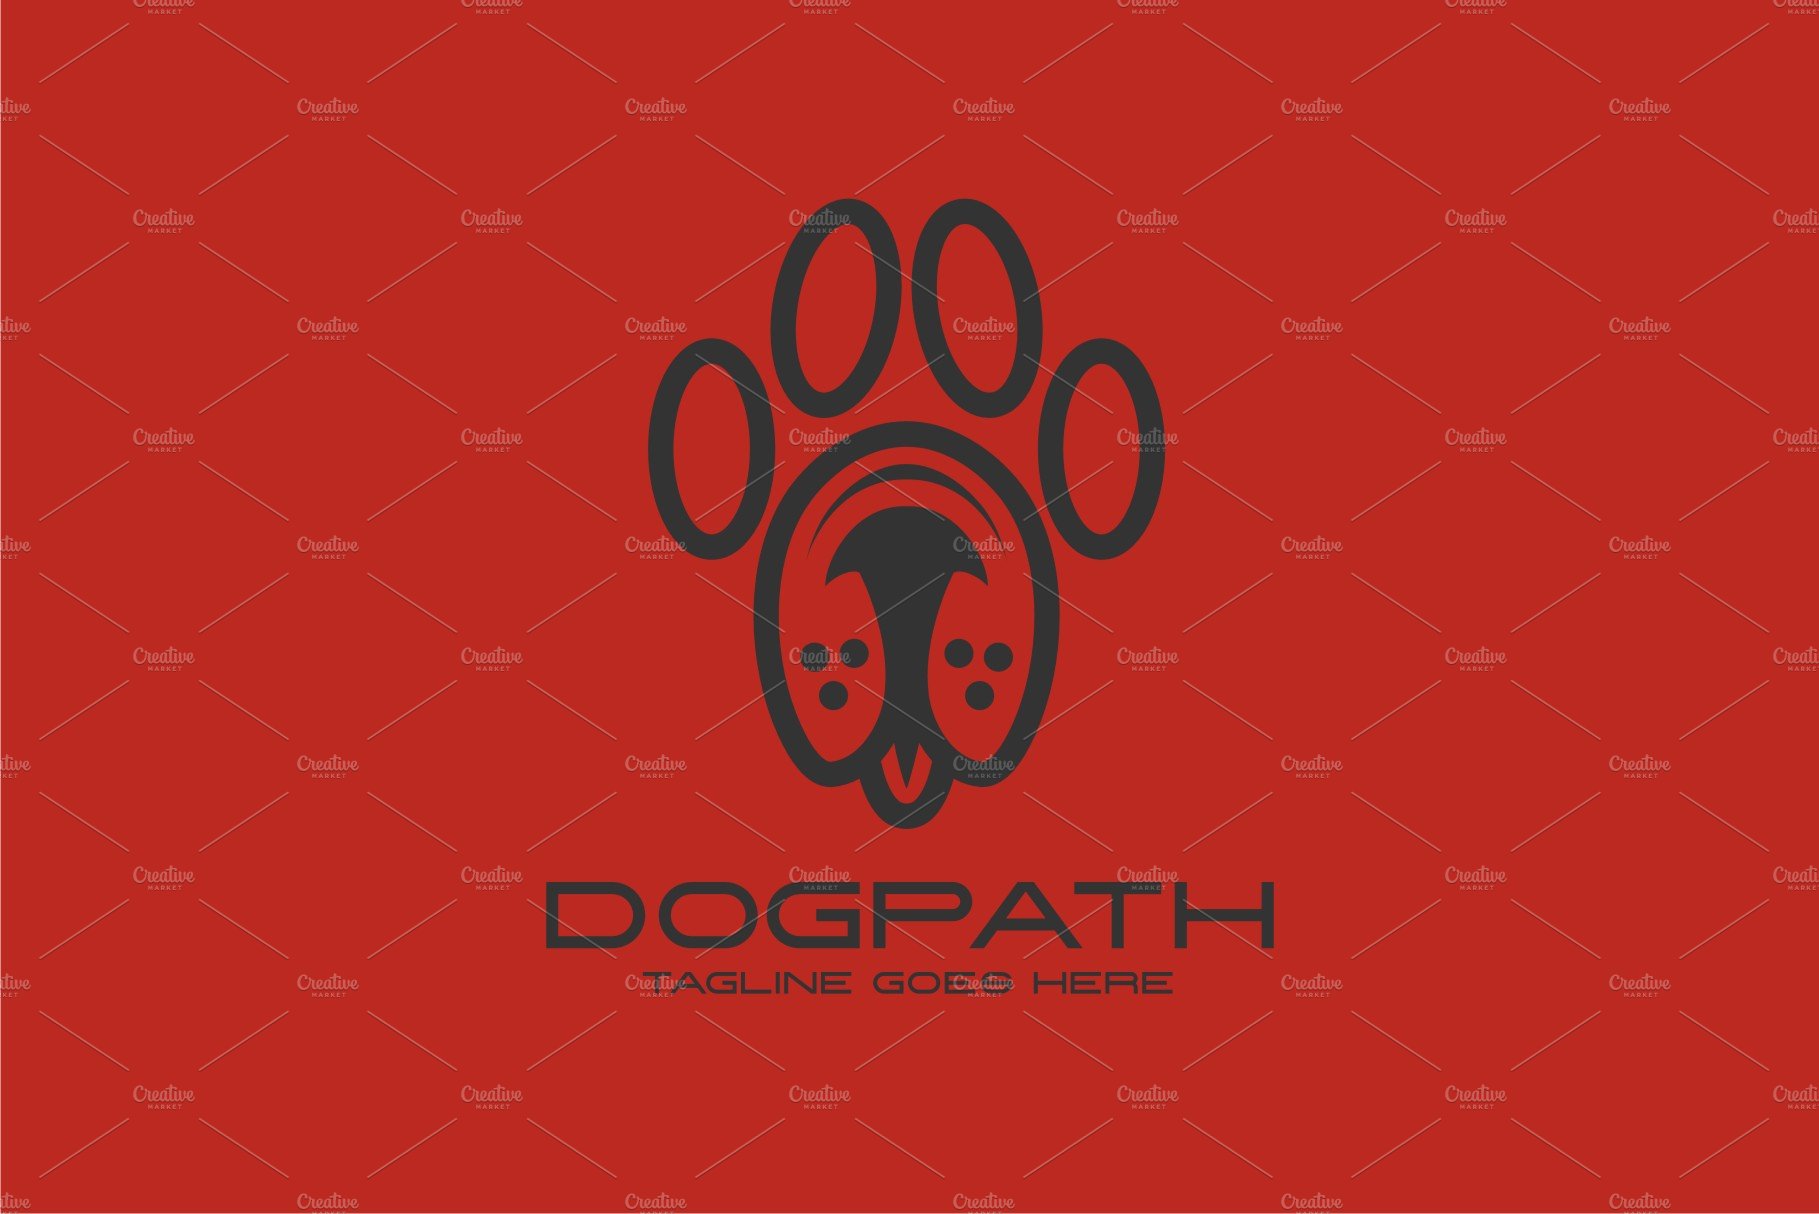 DogPath preview image.